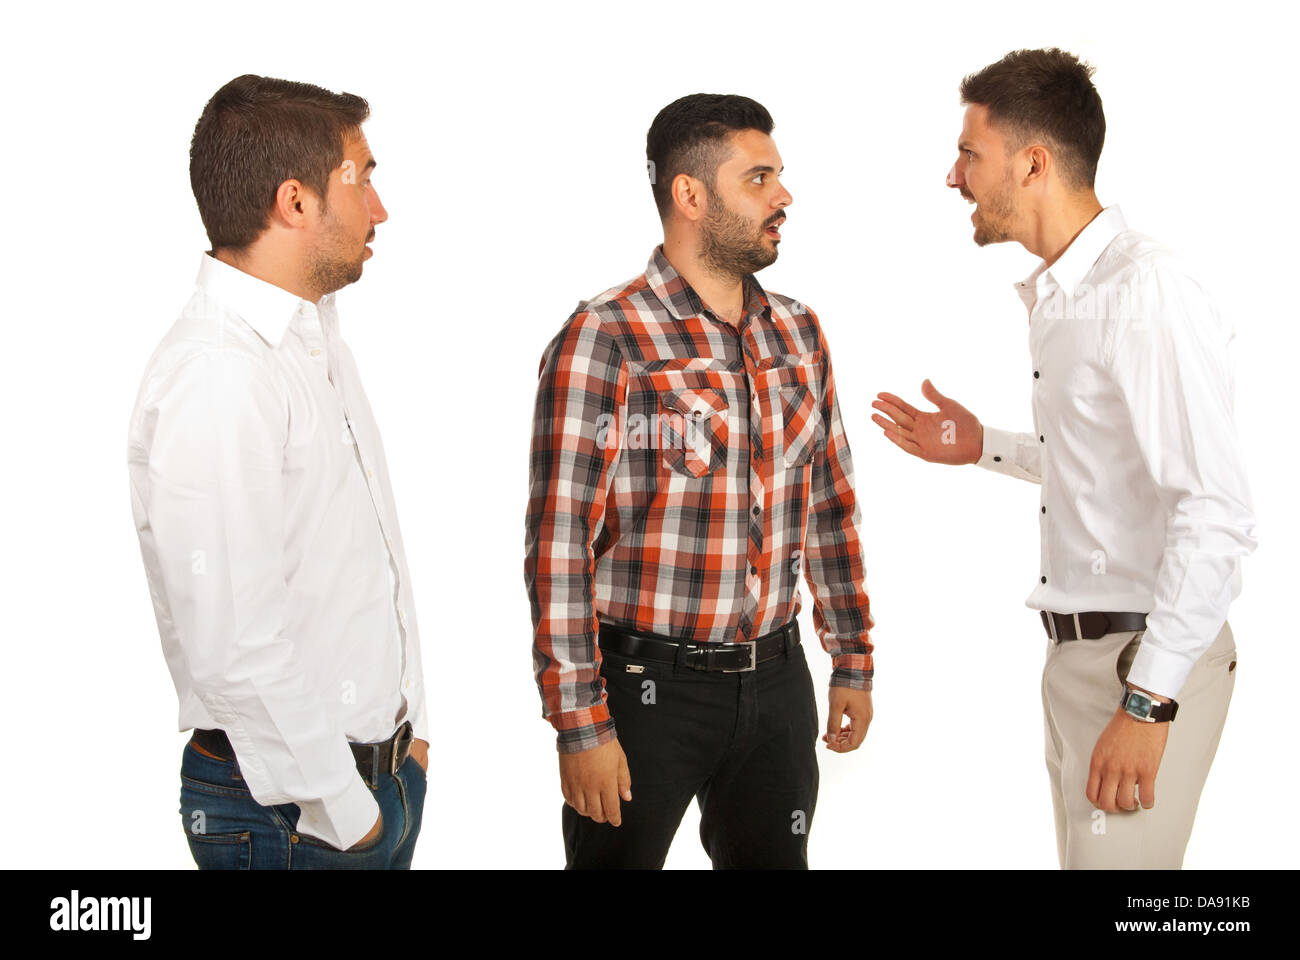 Business man yelling at his colleague and other man being surprised isolated on white background Stock Photo